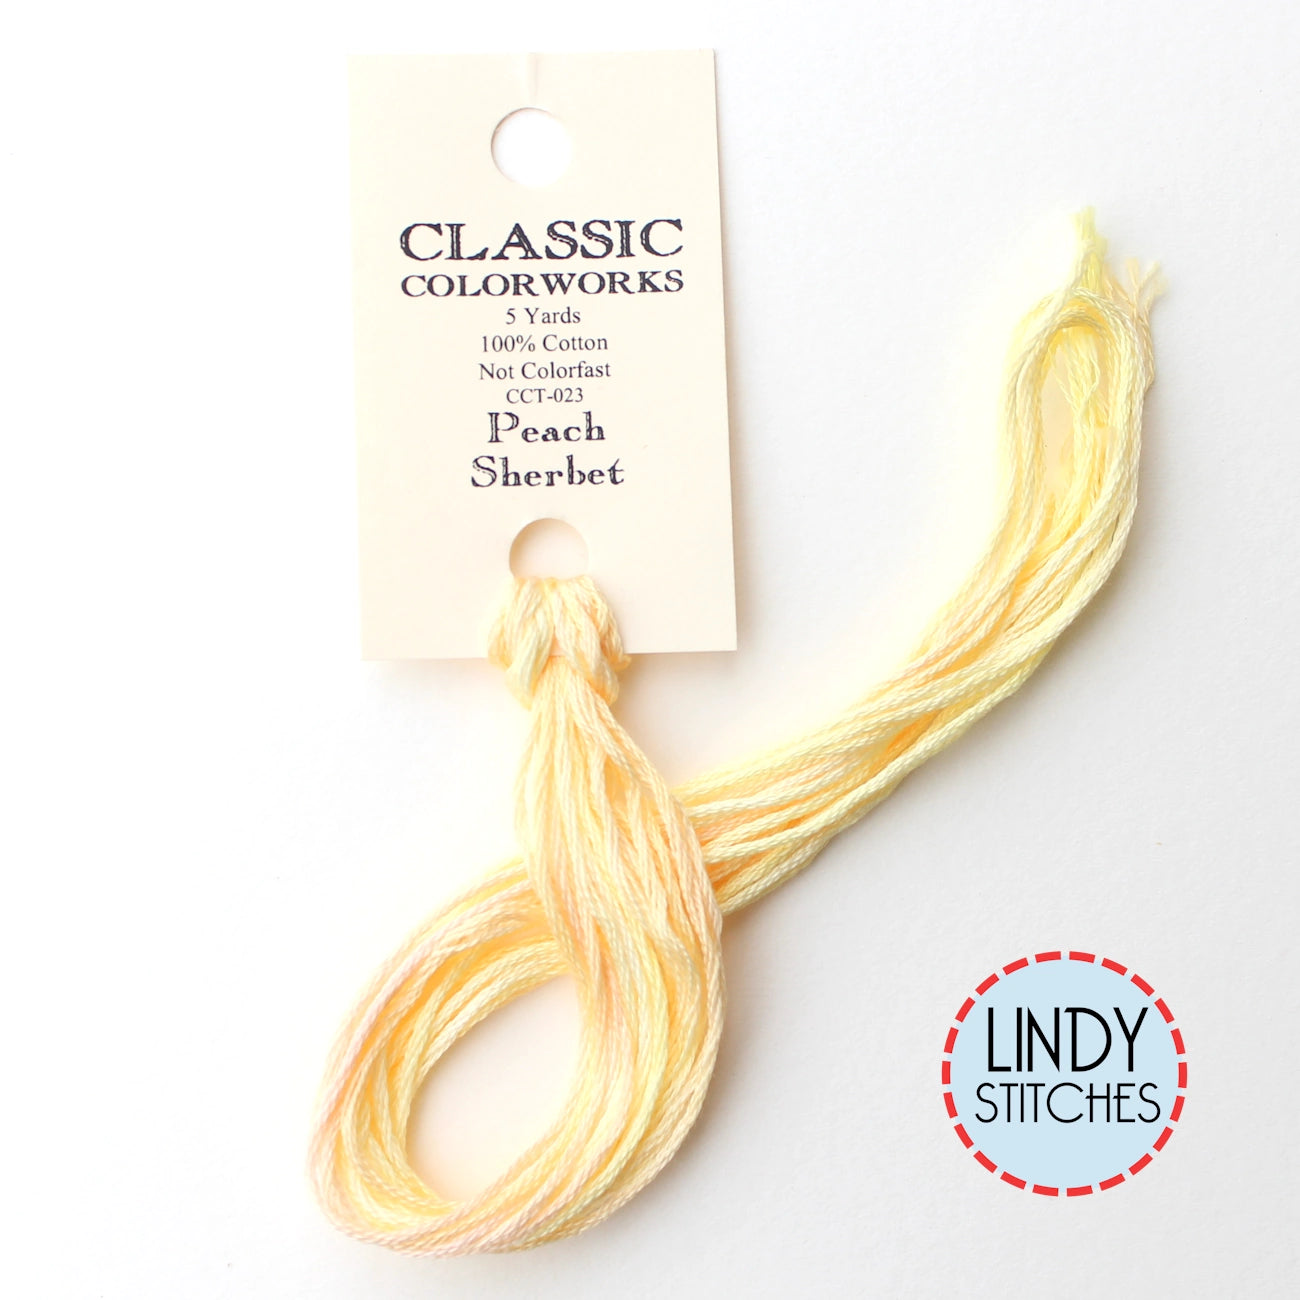 Peach Sherbet Classic Colorworks Floss Hand Dyed Cotton Skein